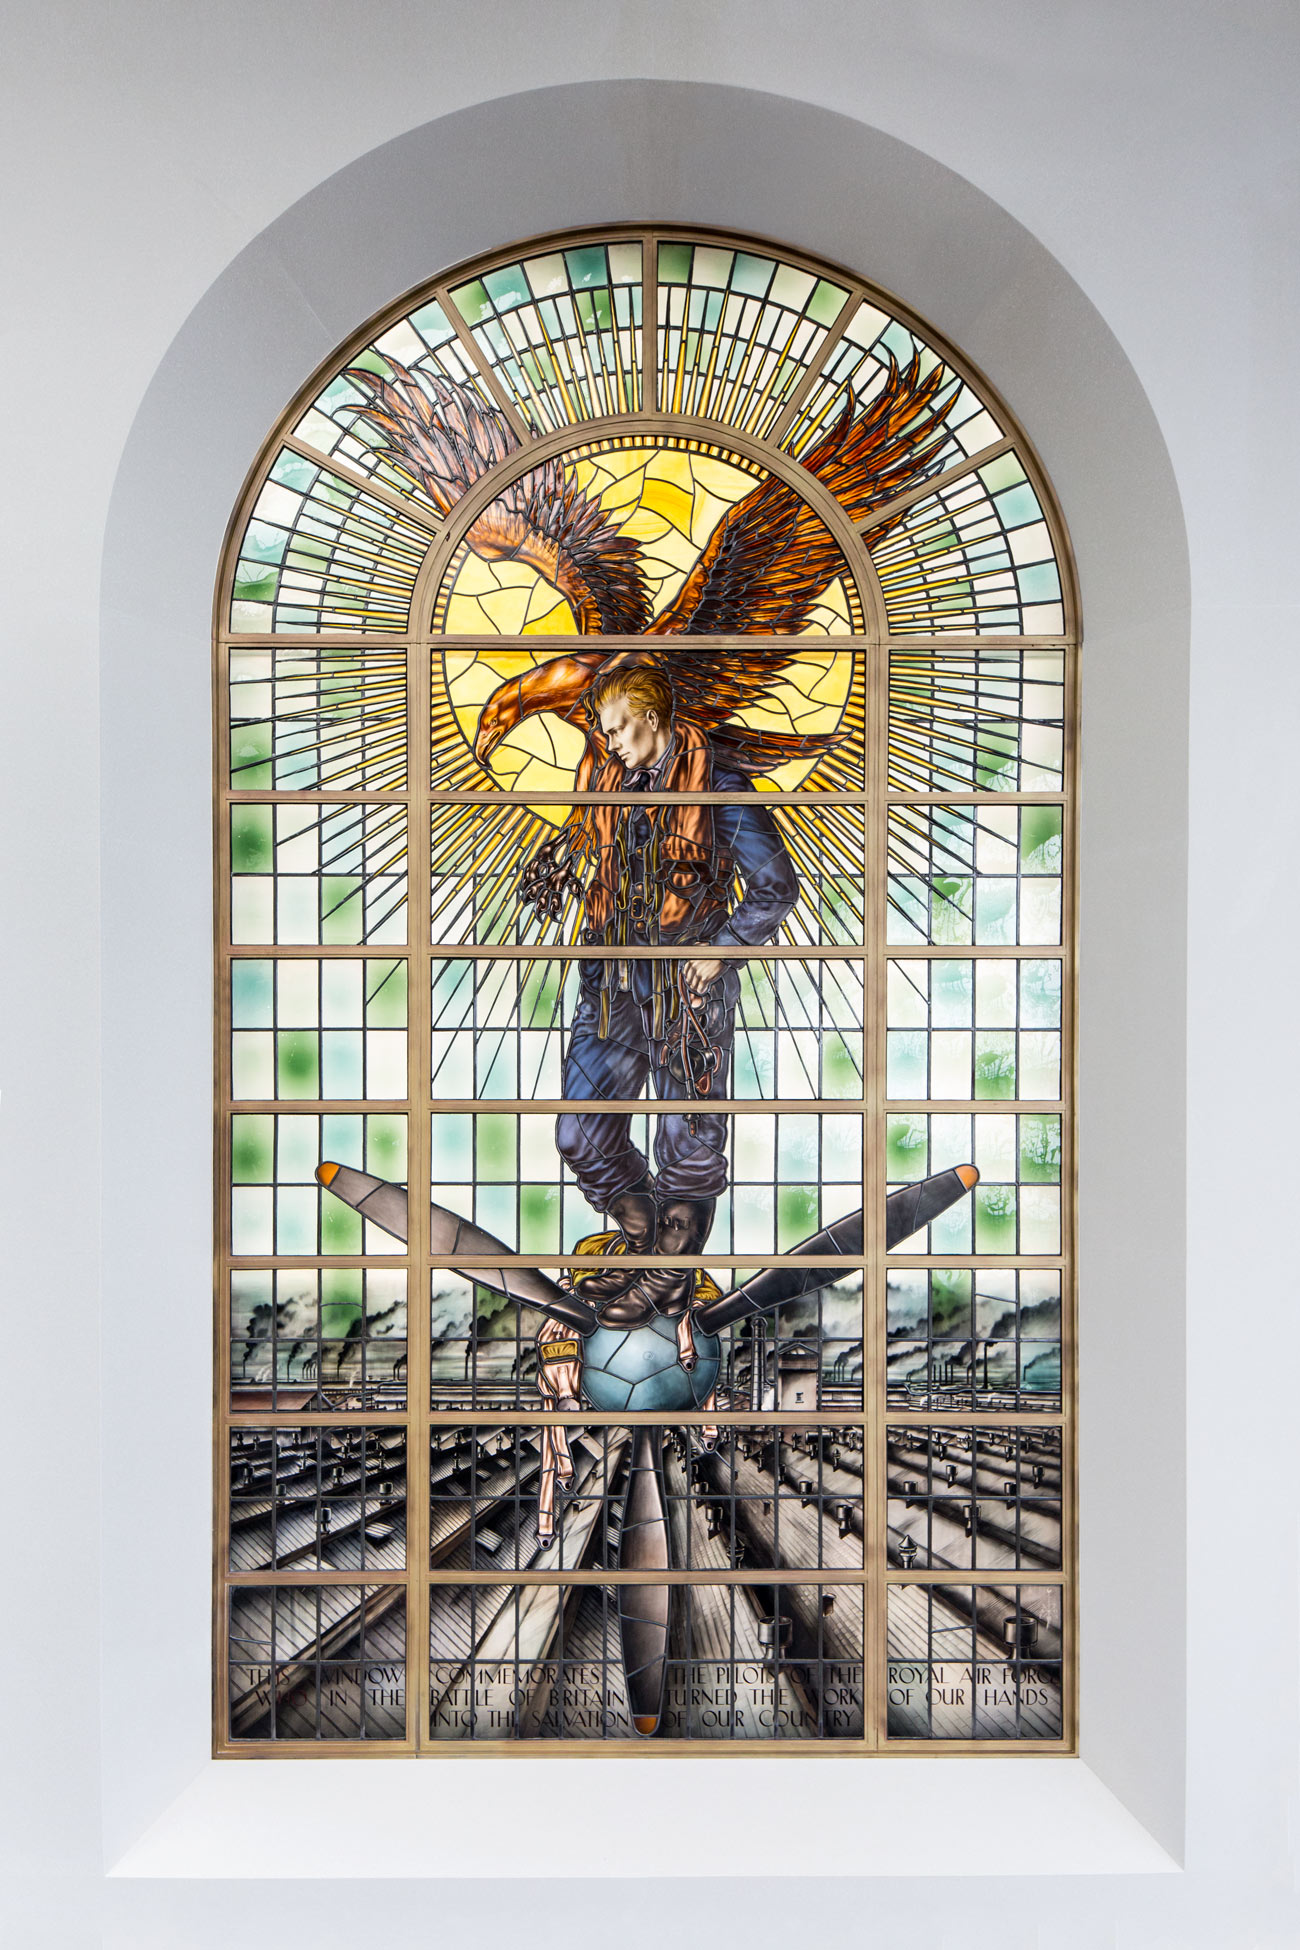 High resoltion photograph of the Rolls-Royce Battle of Britain memorial stained-glass window in Derby